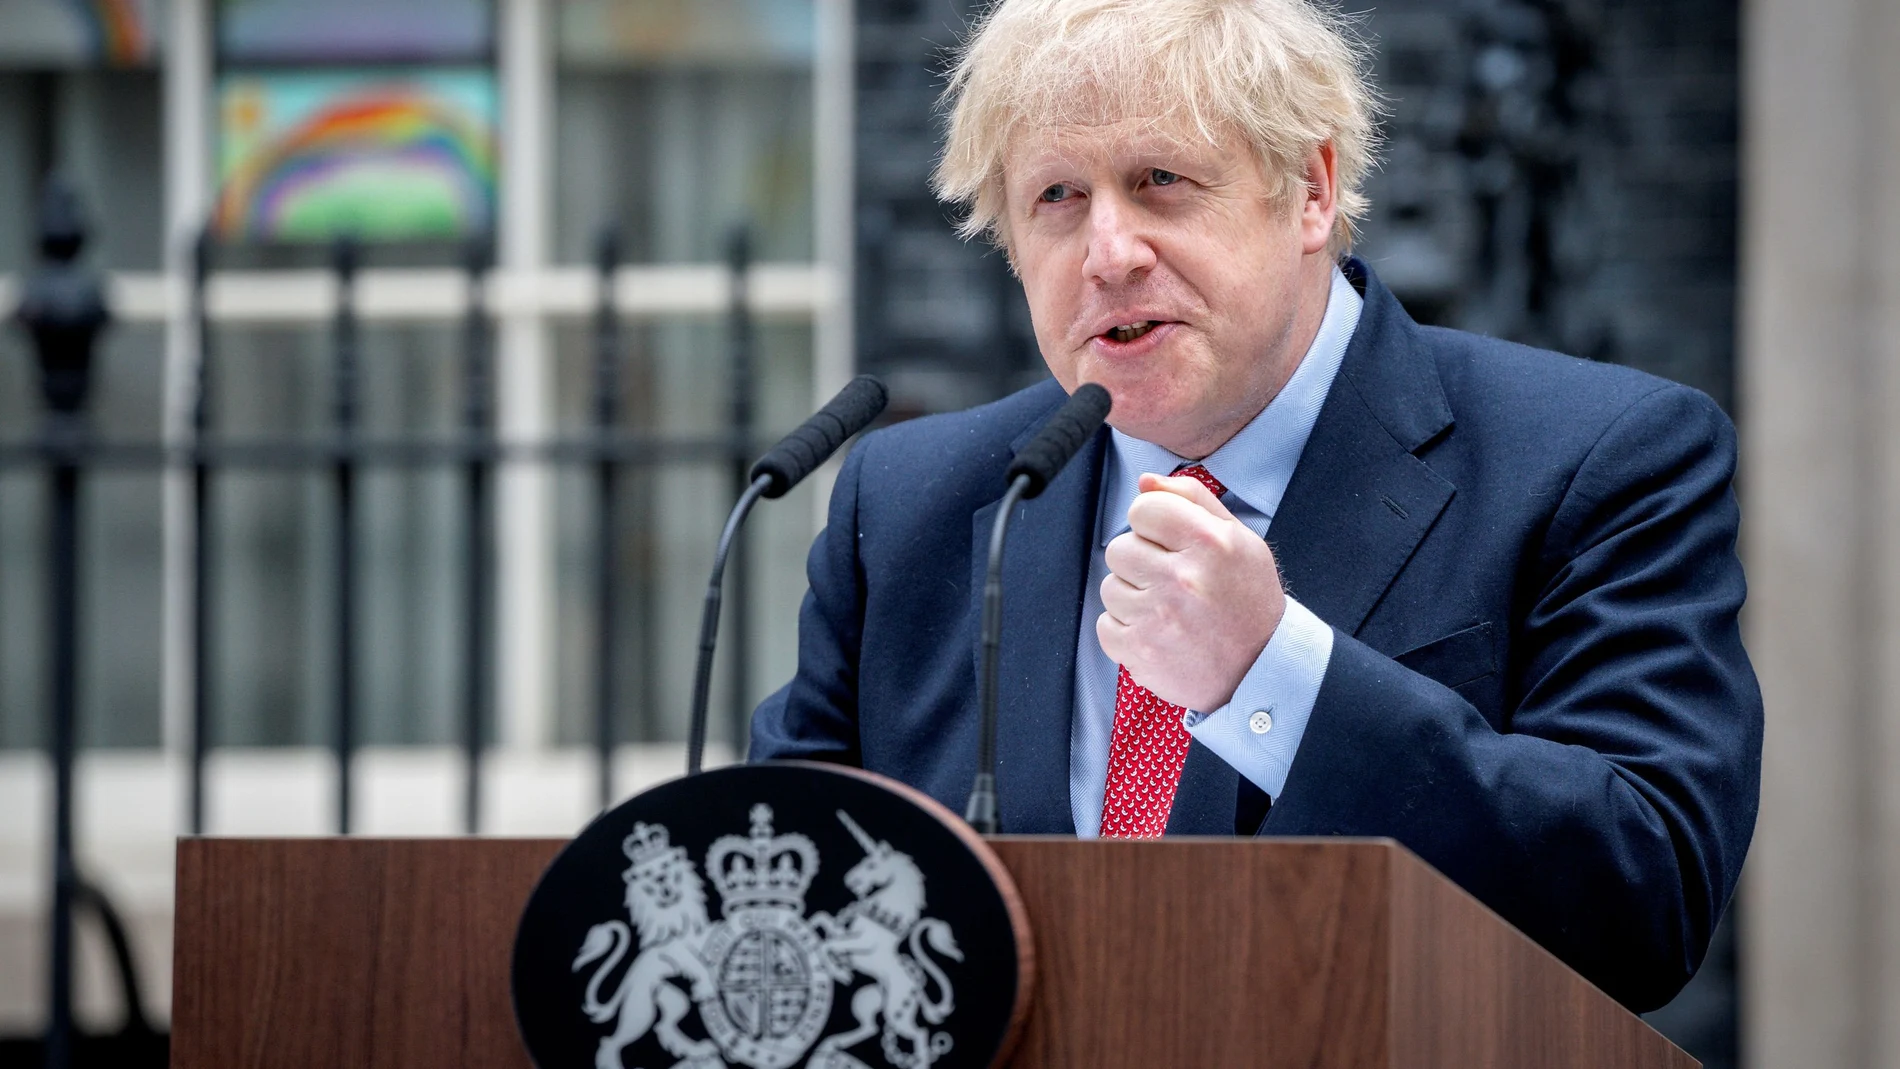 UK Prime Minister Boris Johnson gives a statement outside 10 Downing Street, as he returns to work following recovering from Coronavirus at Chequers.